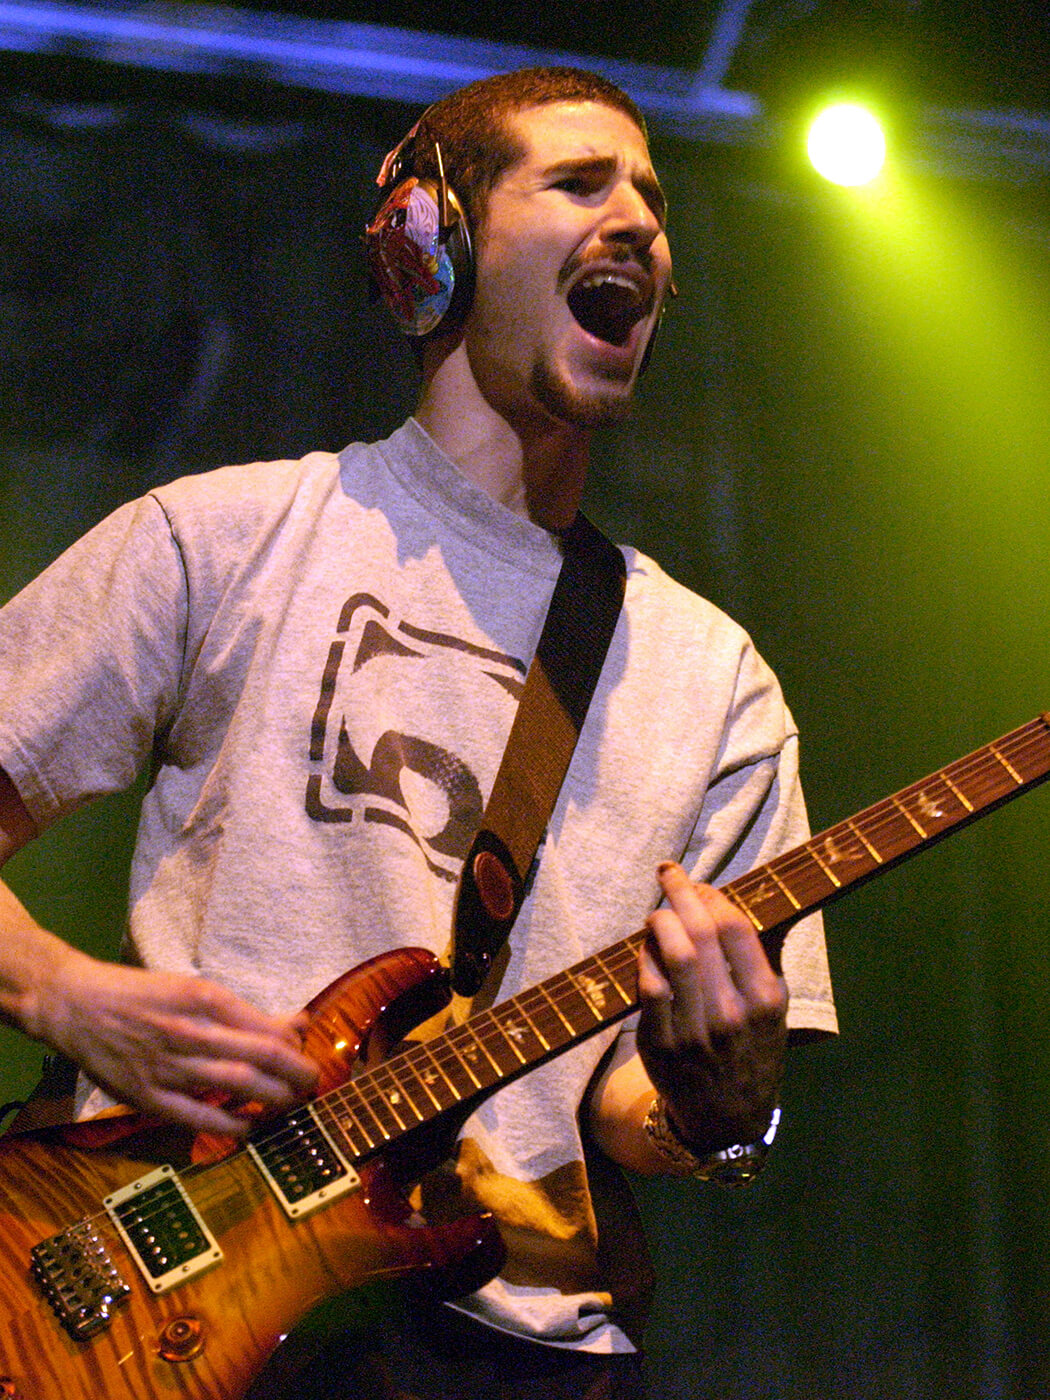 Brad Delson of Linkin Park performing with a PRS guitar in 2002, photo by Scott Harrison/Getty Images